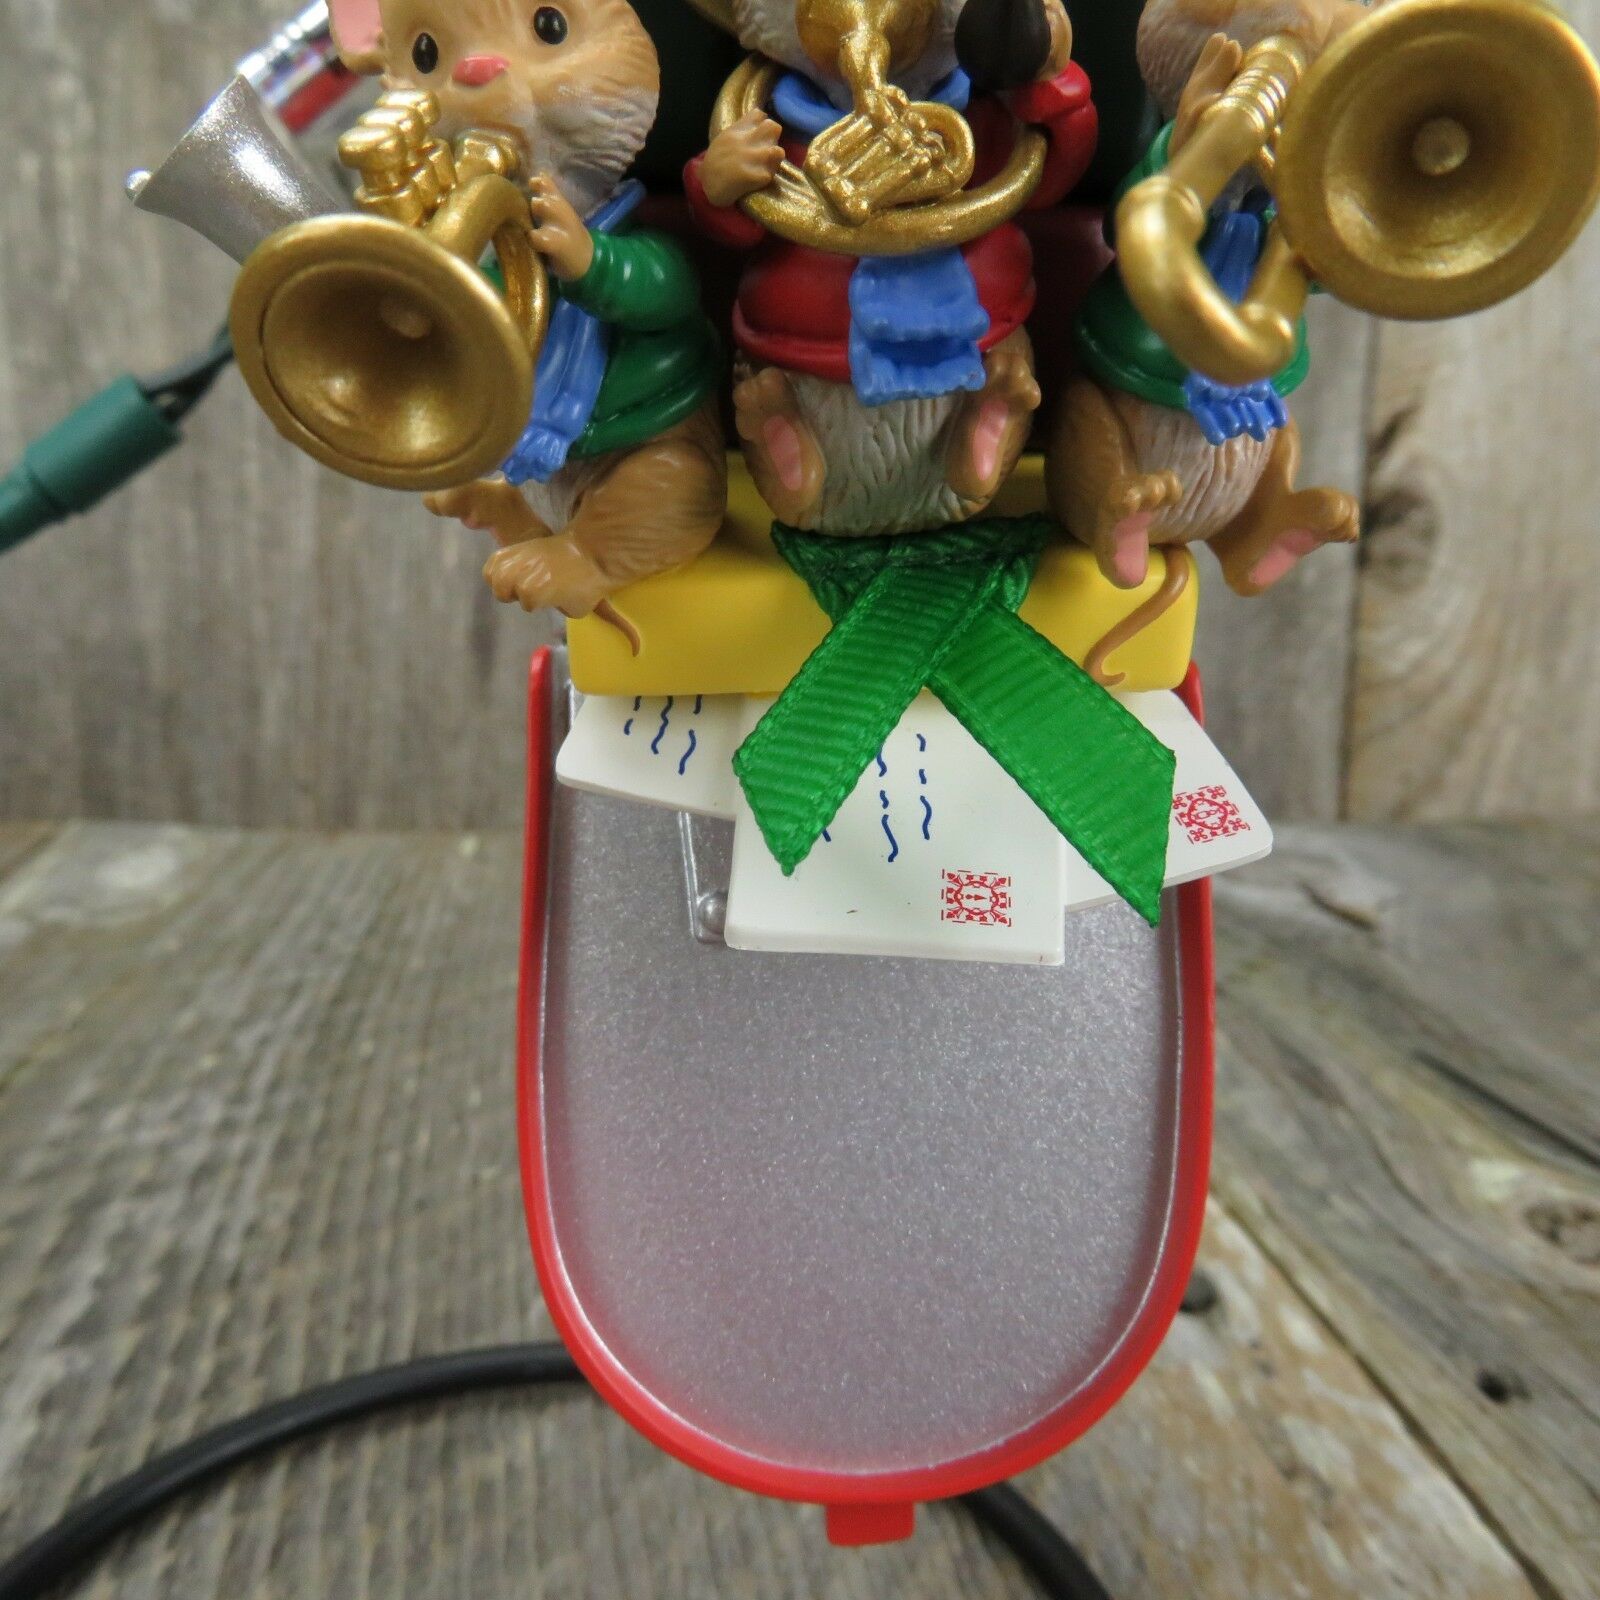 Mailbox Melodies Ornament Hallmark Christmas Mice Mouse Tree VIDEO Band Music - At Grandma's Table